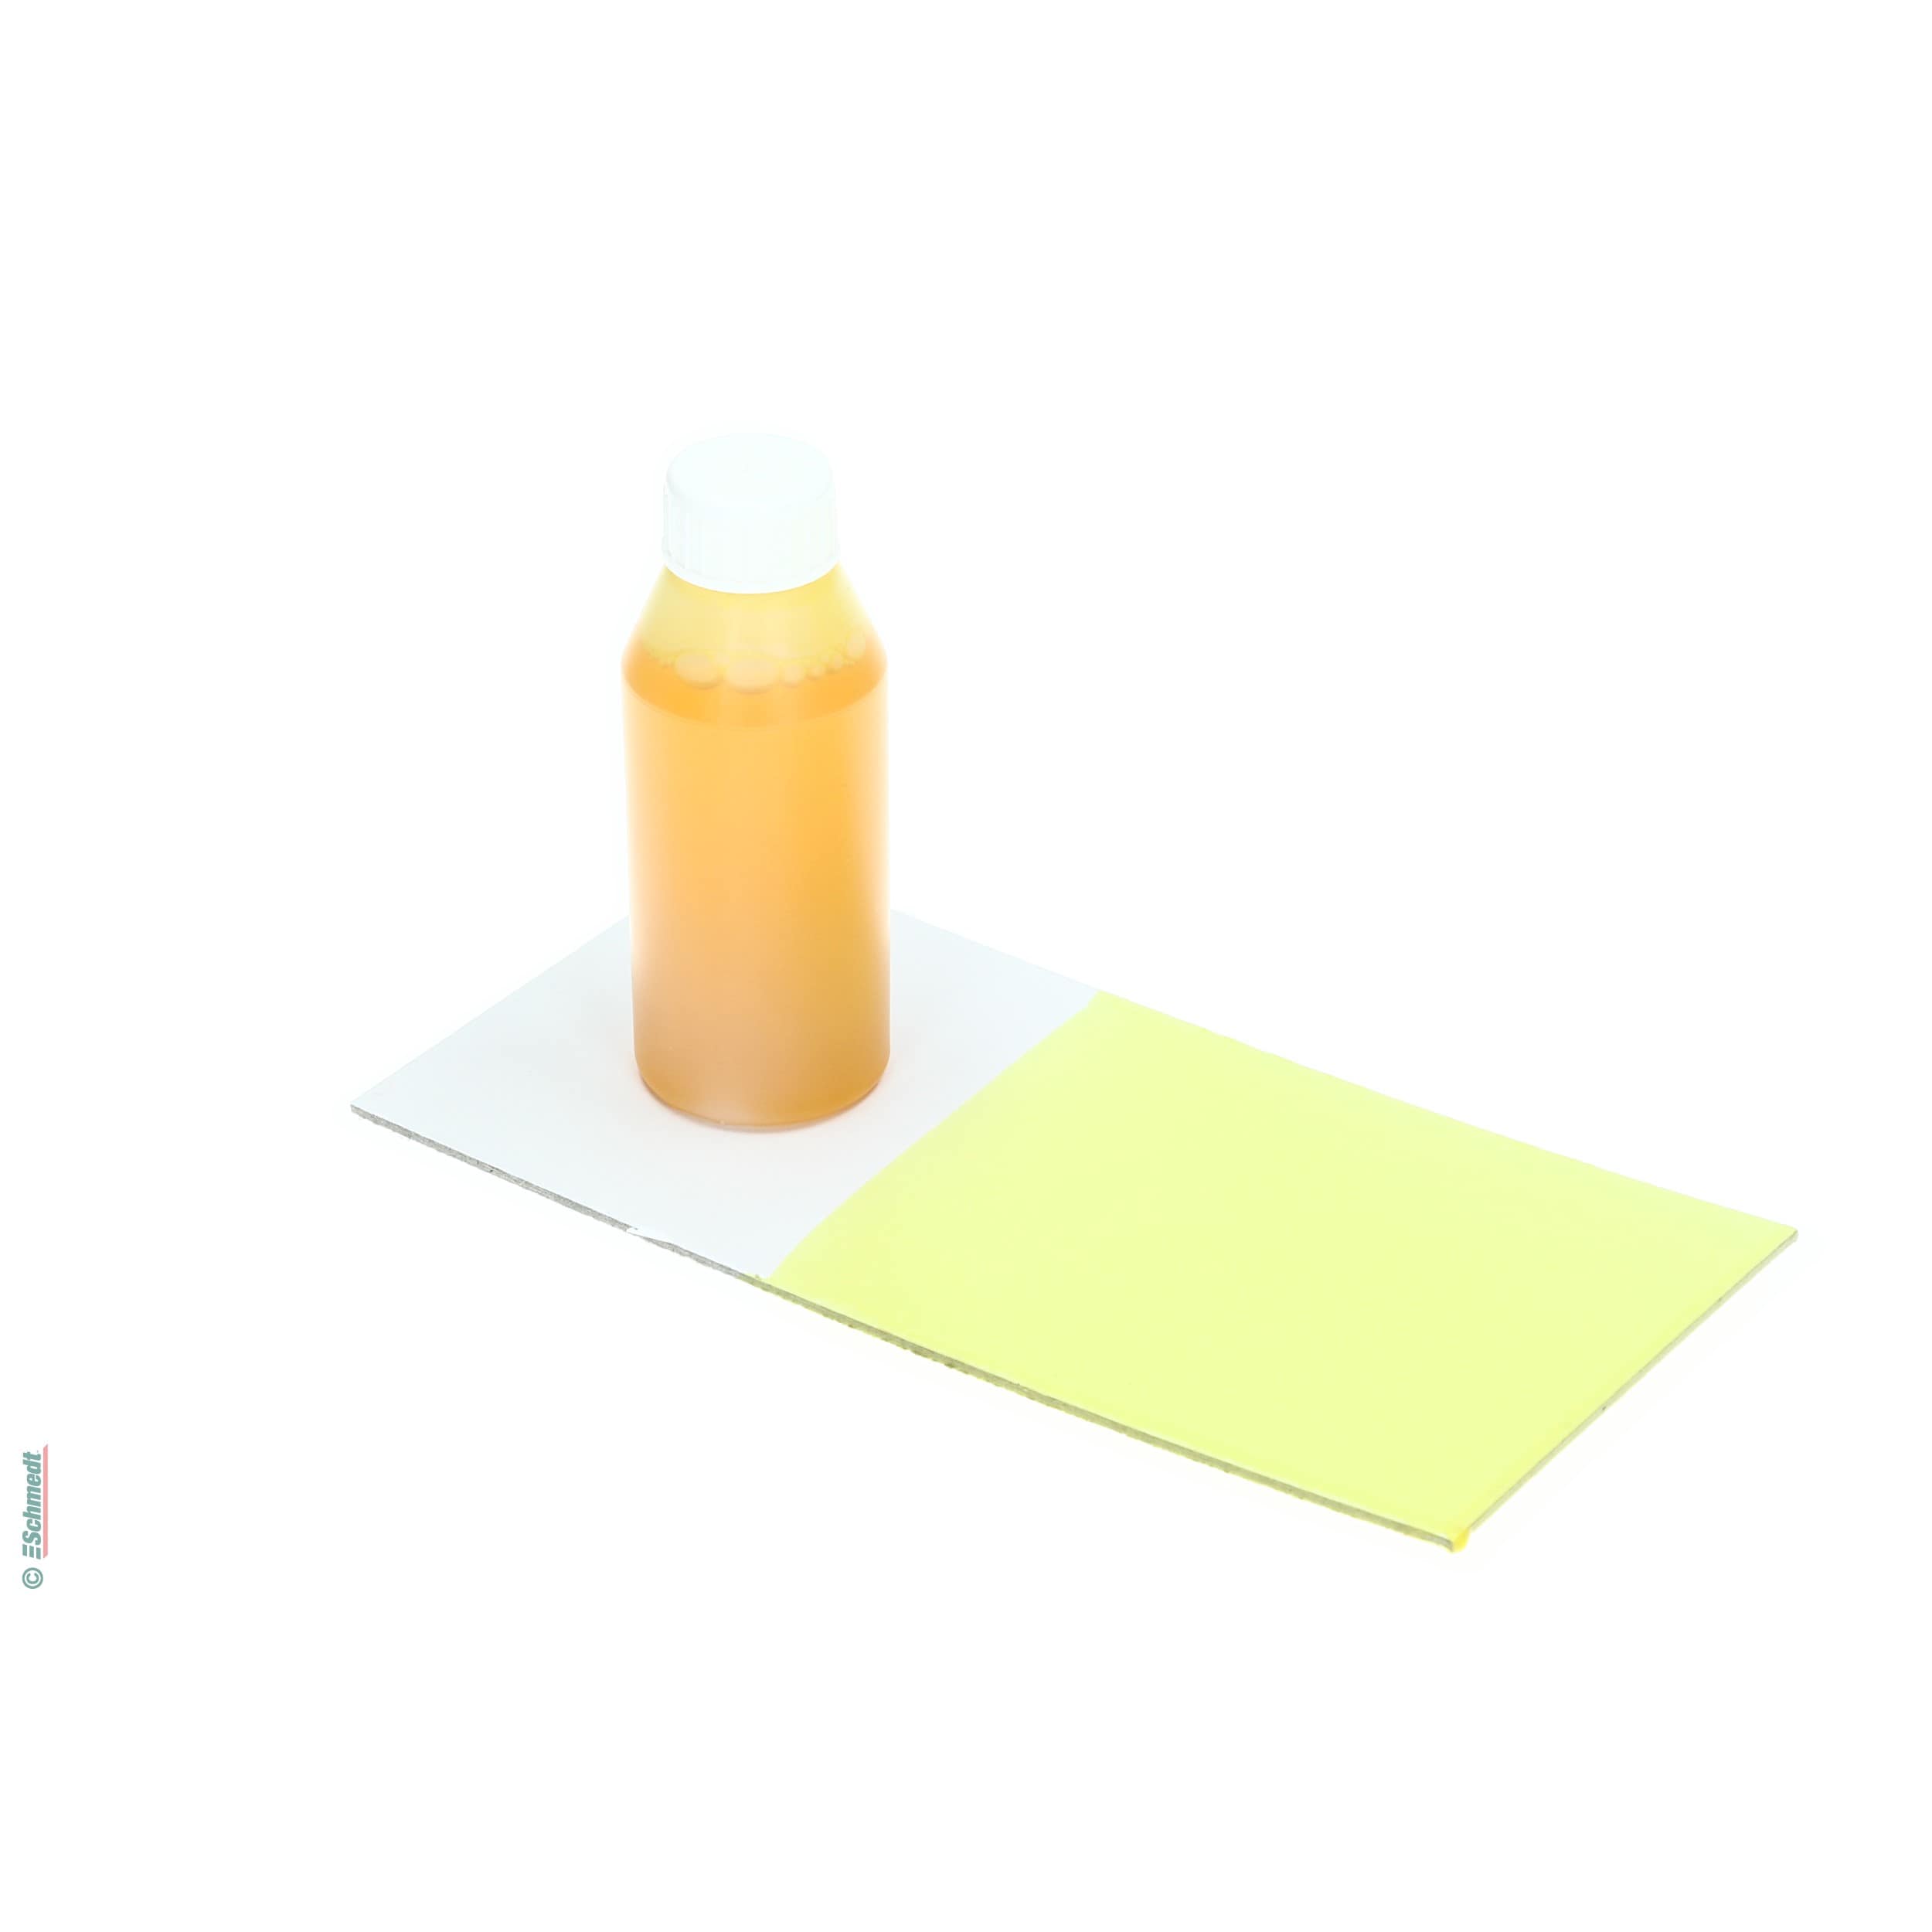 Glue dye - Colour yellow - Contents Bottle / 100 ml - to dye dispersion glues such as pad-binding or perfect-binding glue to bind note pads ... - image-1